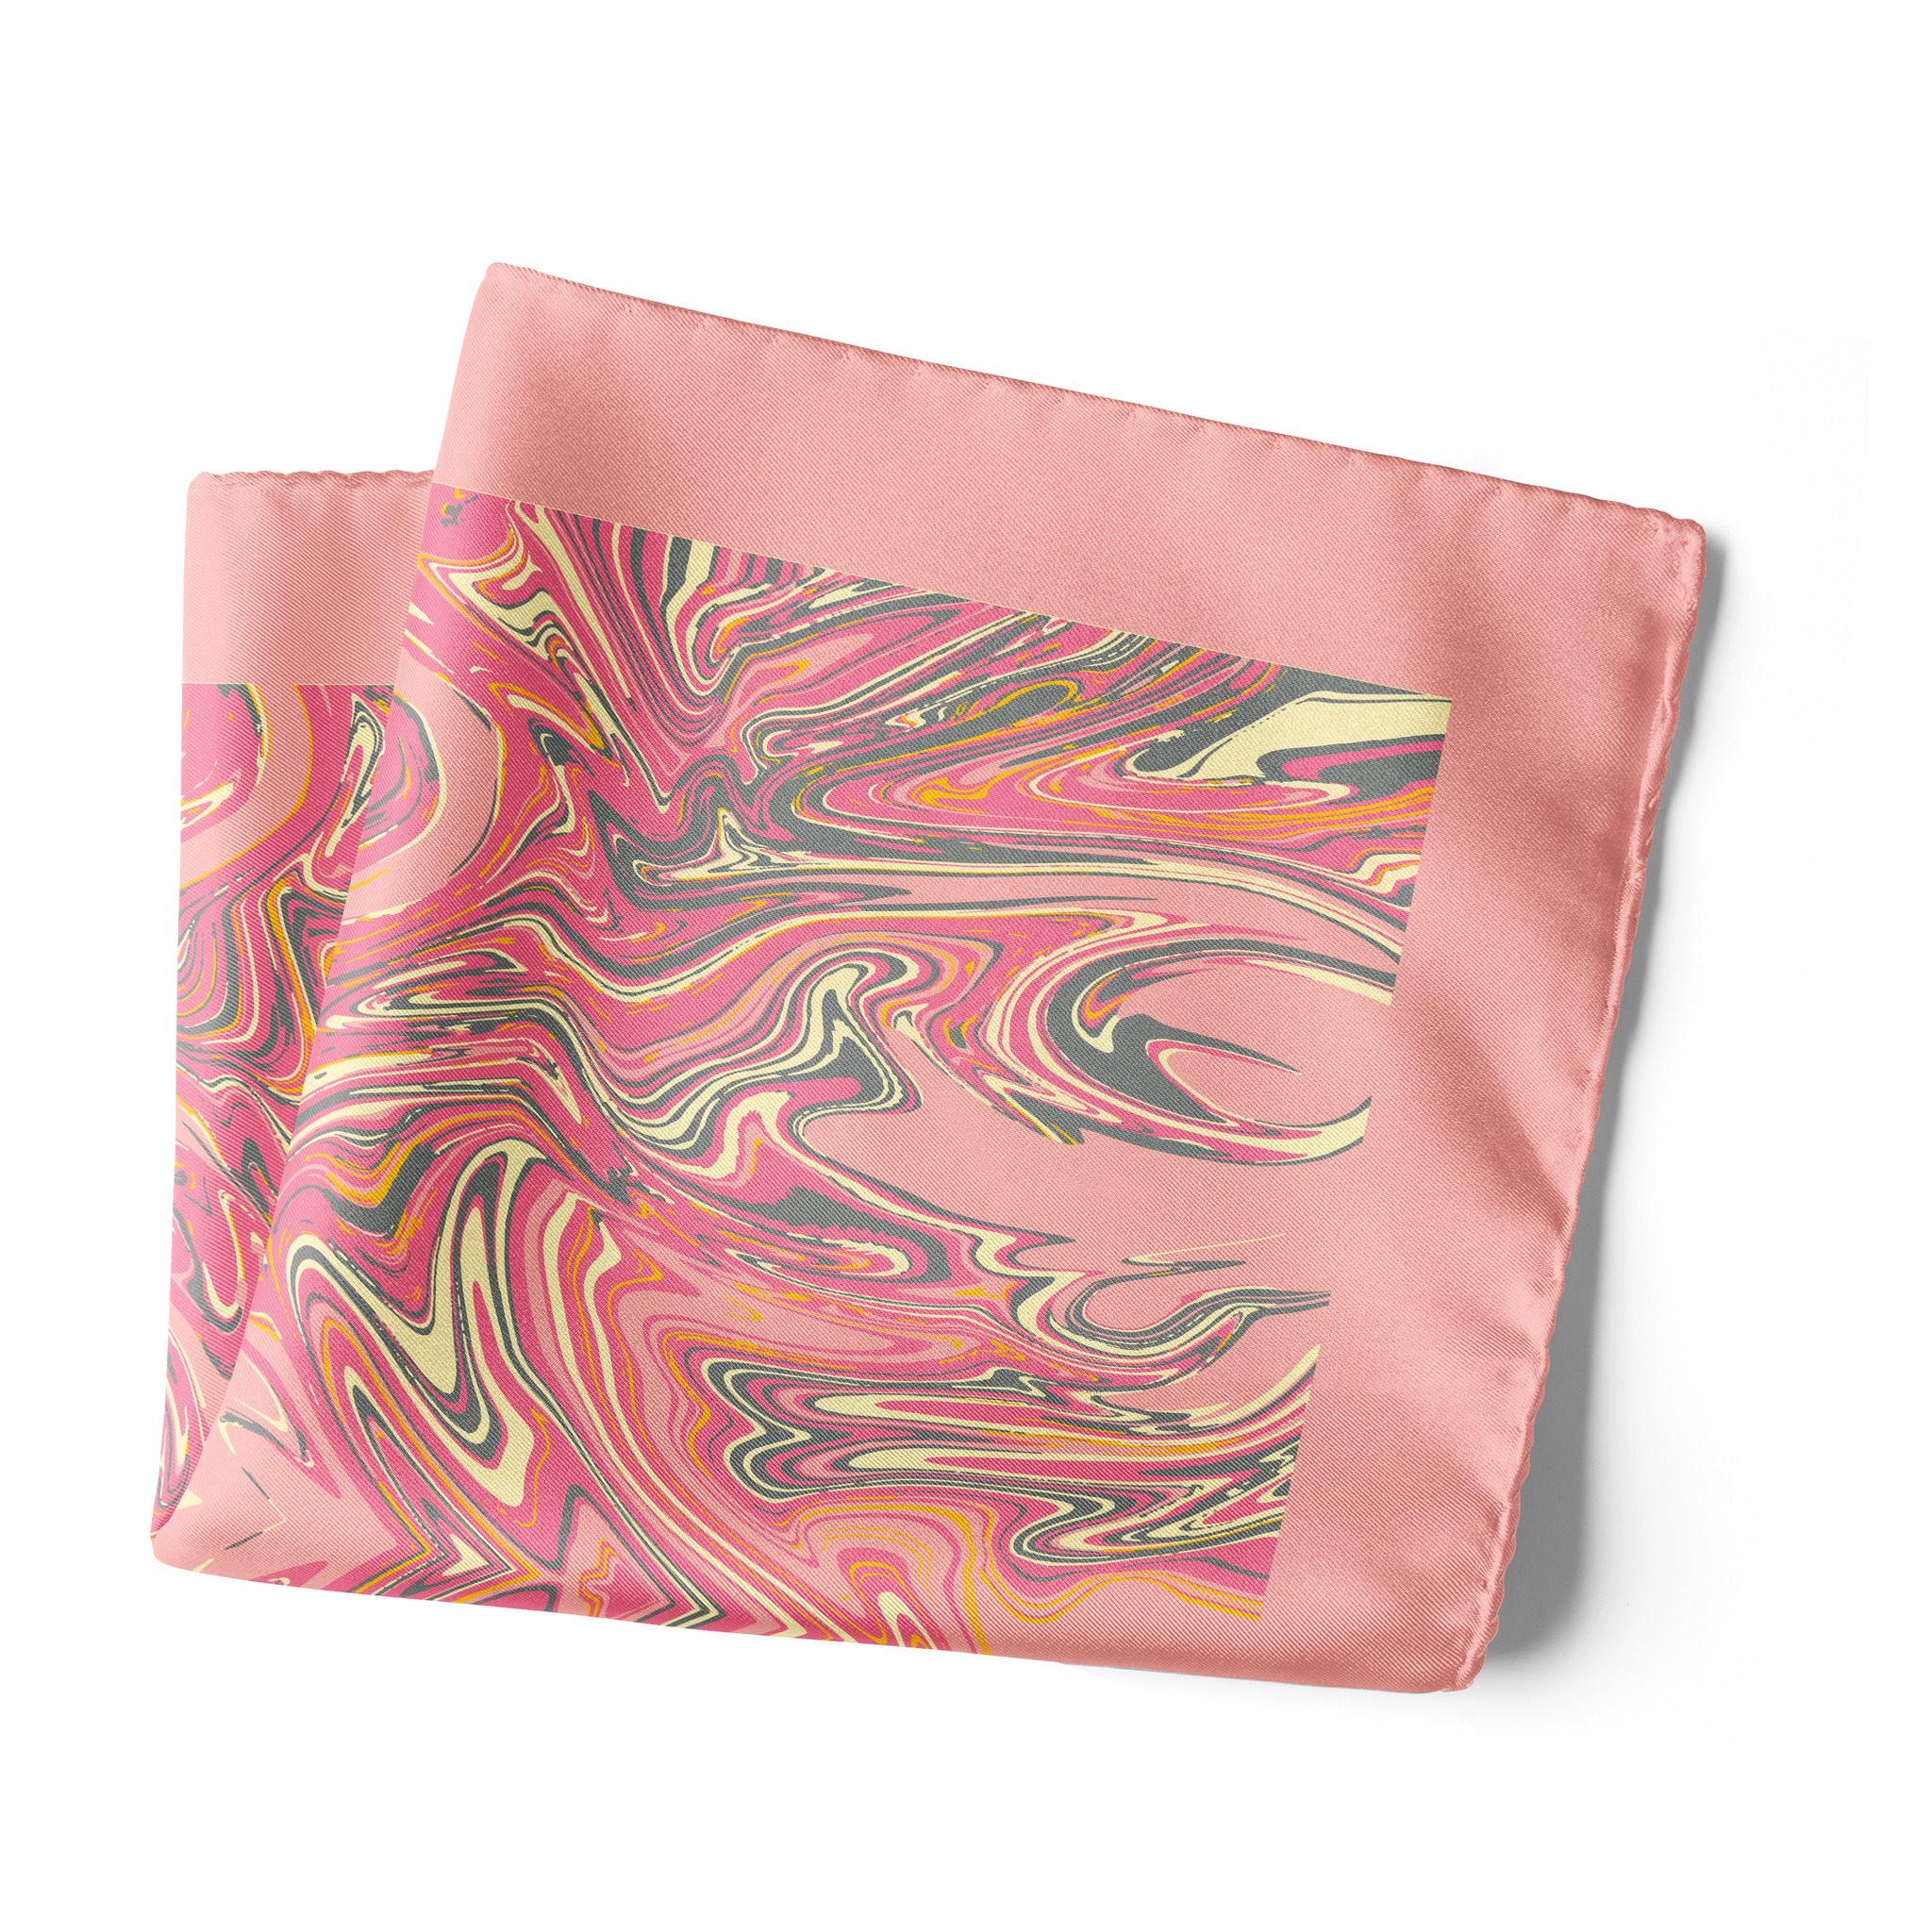 Chokore Rose Pink Silk Pocket Square from the Marble Design range